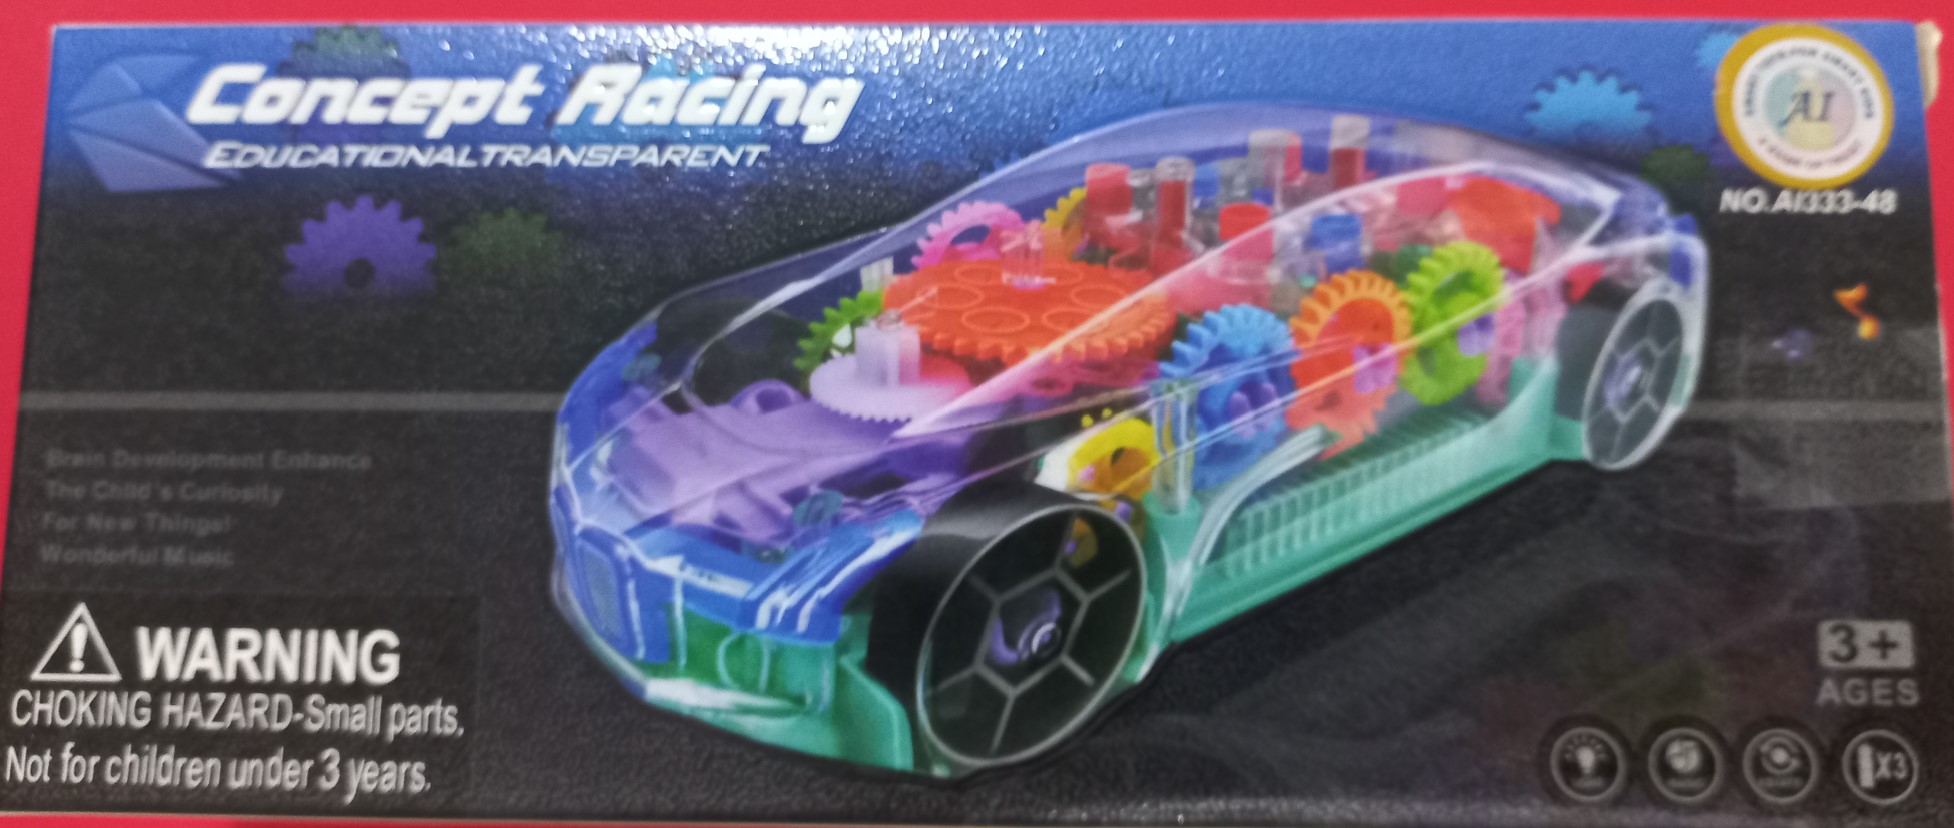 Concept Racing Car Toy for Age 3+